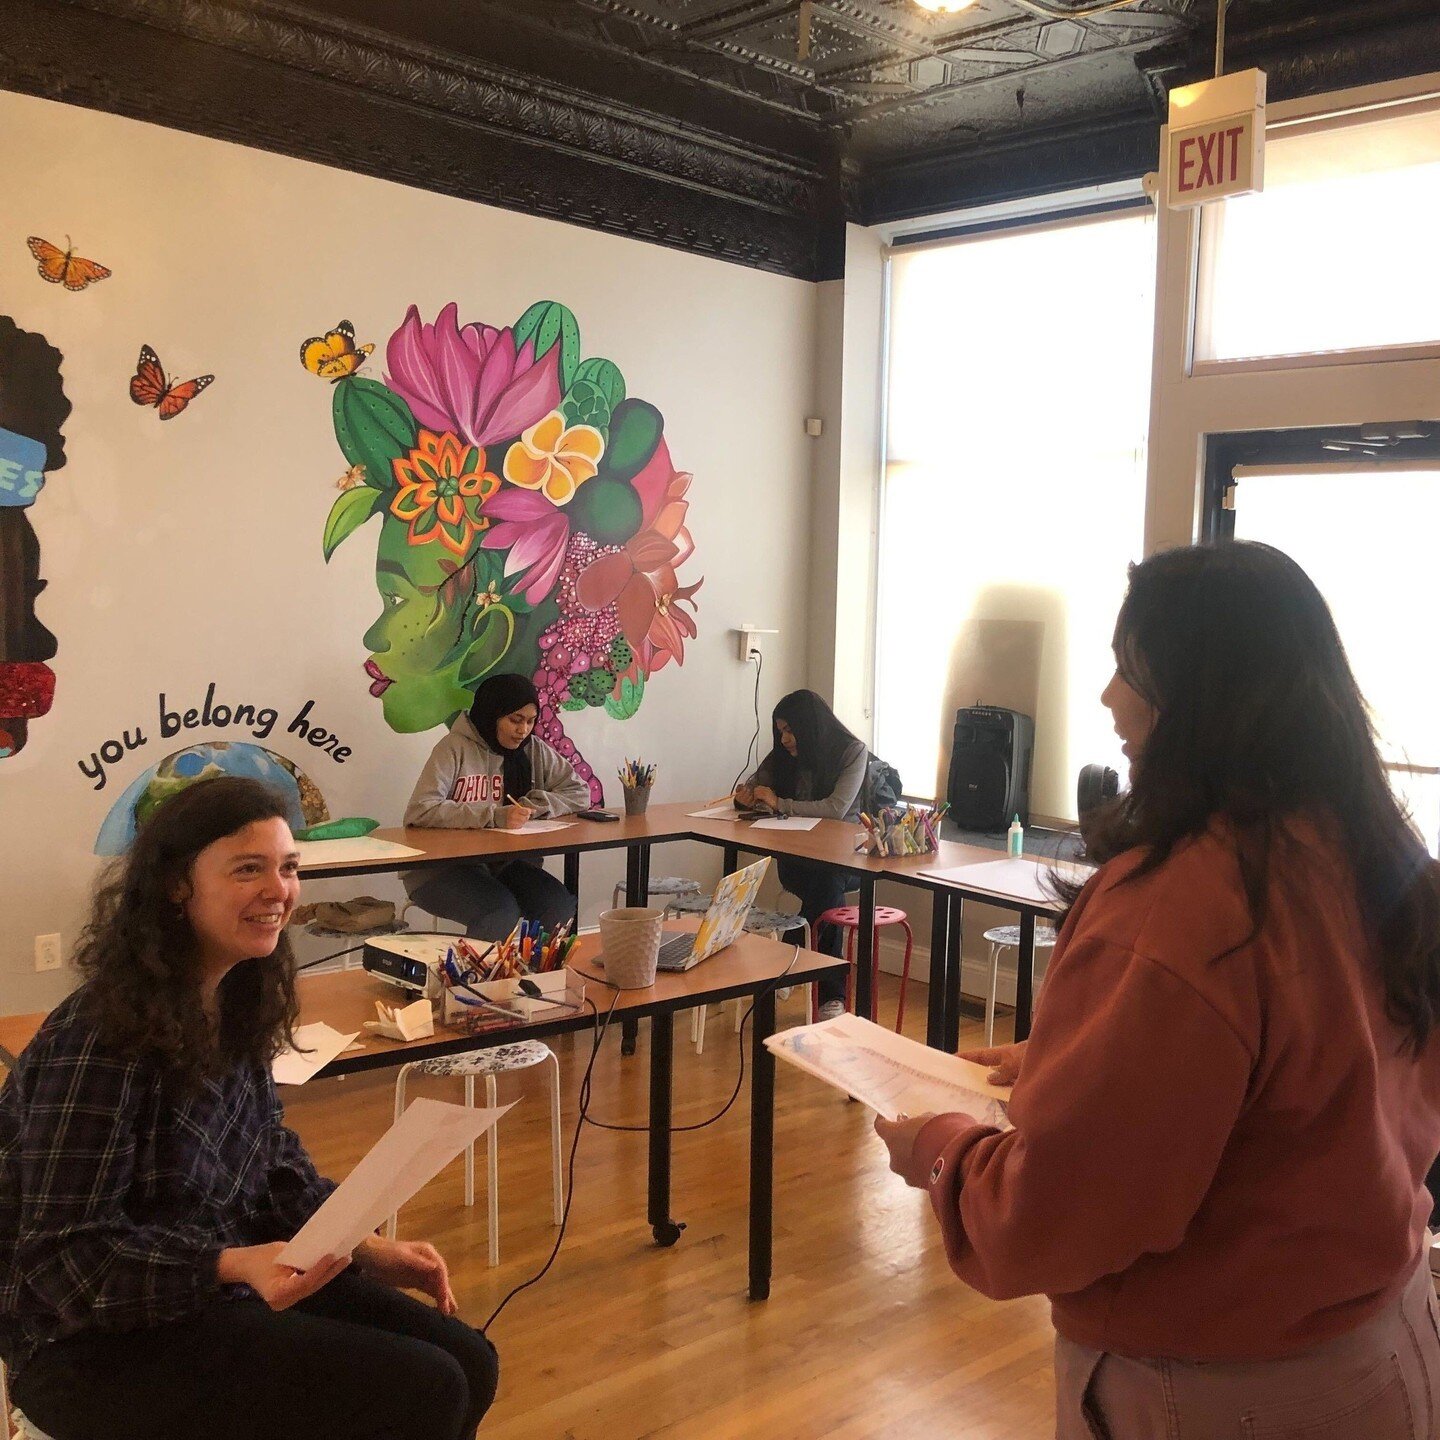 🌟 Dive into the magic of self-expression! ✨ The first session of &quot;Girl Diaries&quot; was an absolute joy! 🎨 Interns Orr and Mira led an enchanting workshop where girls delved into journaling and artistry, crafting their personal diaries and ex